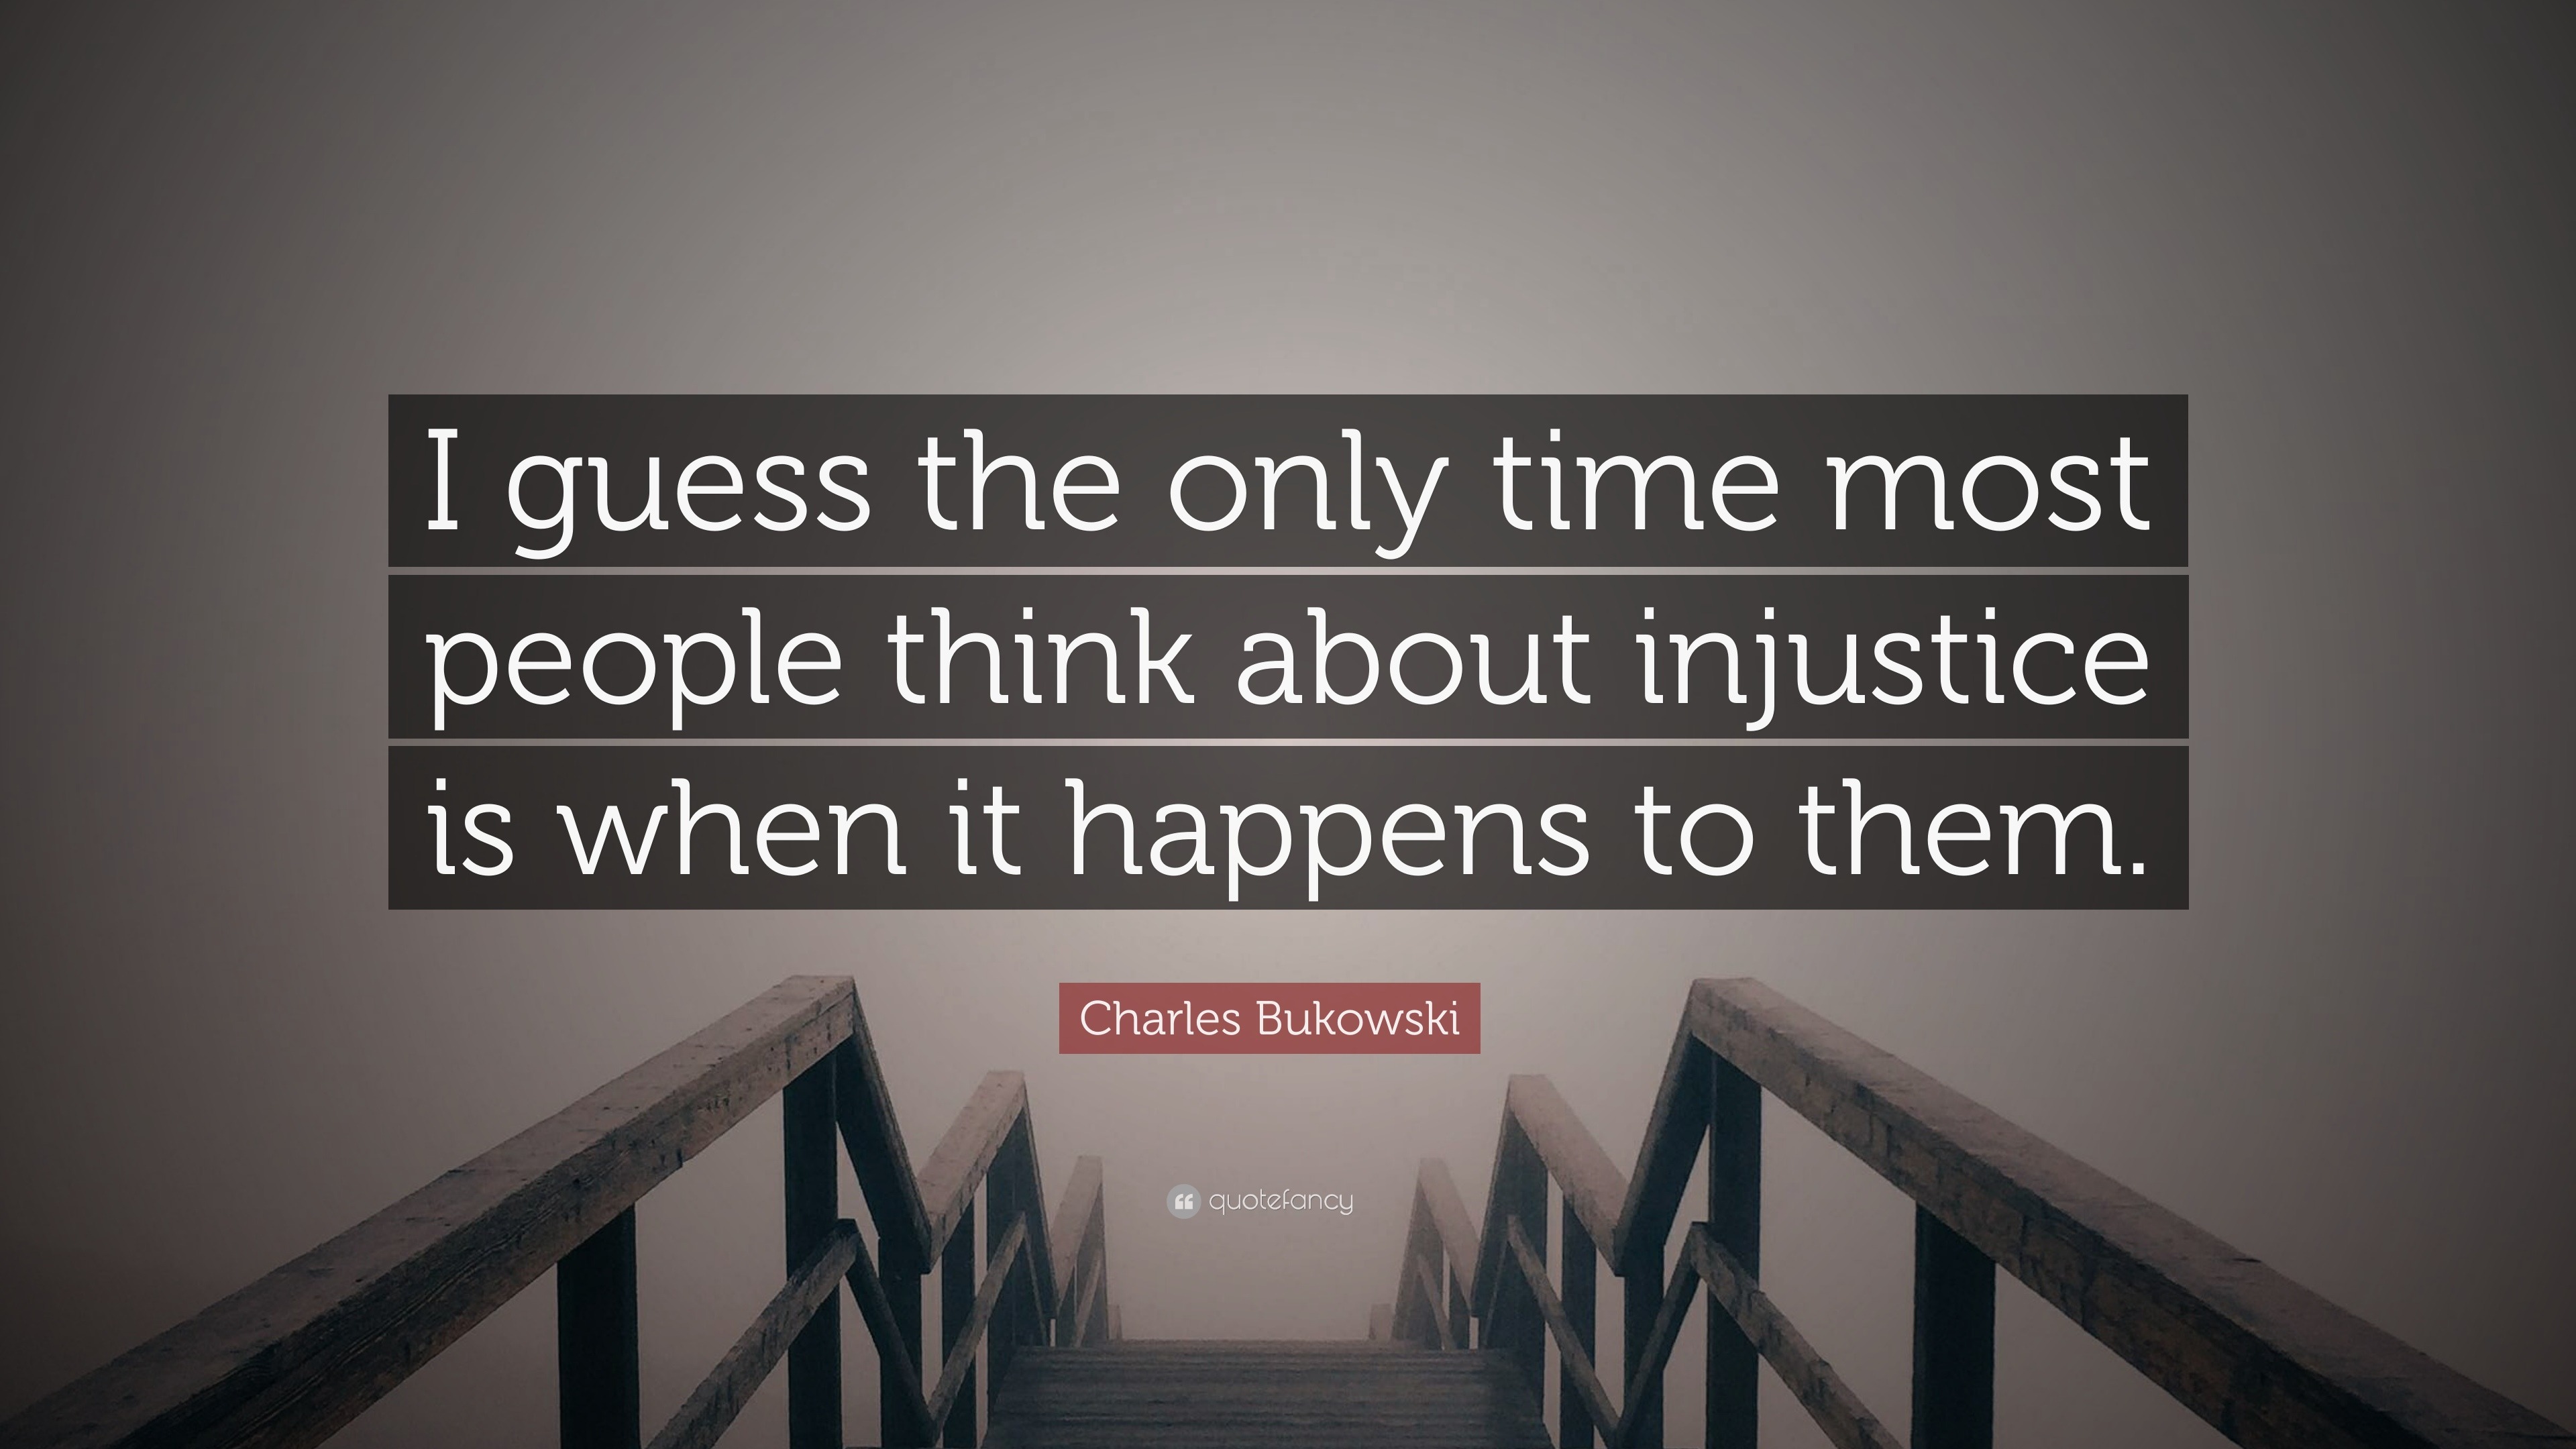 Charles Bukowski Quote: “I guess the only time most people think about is when